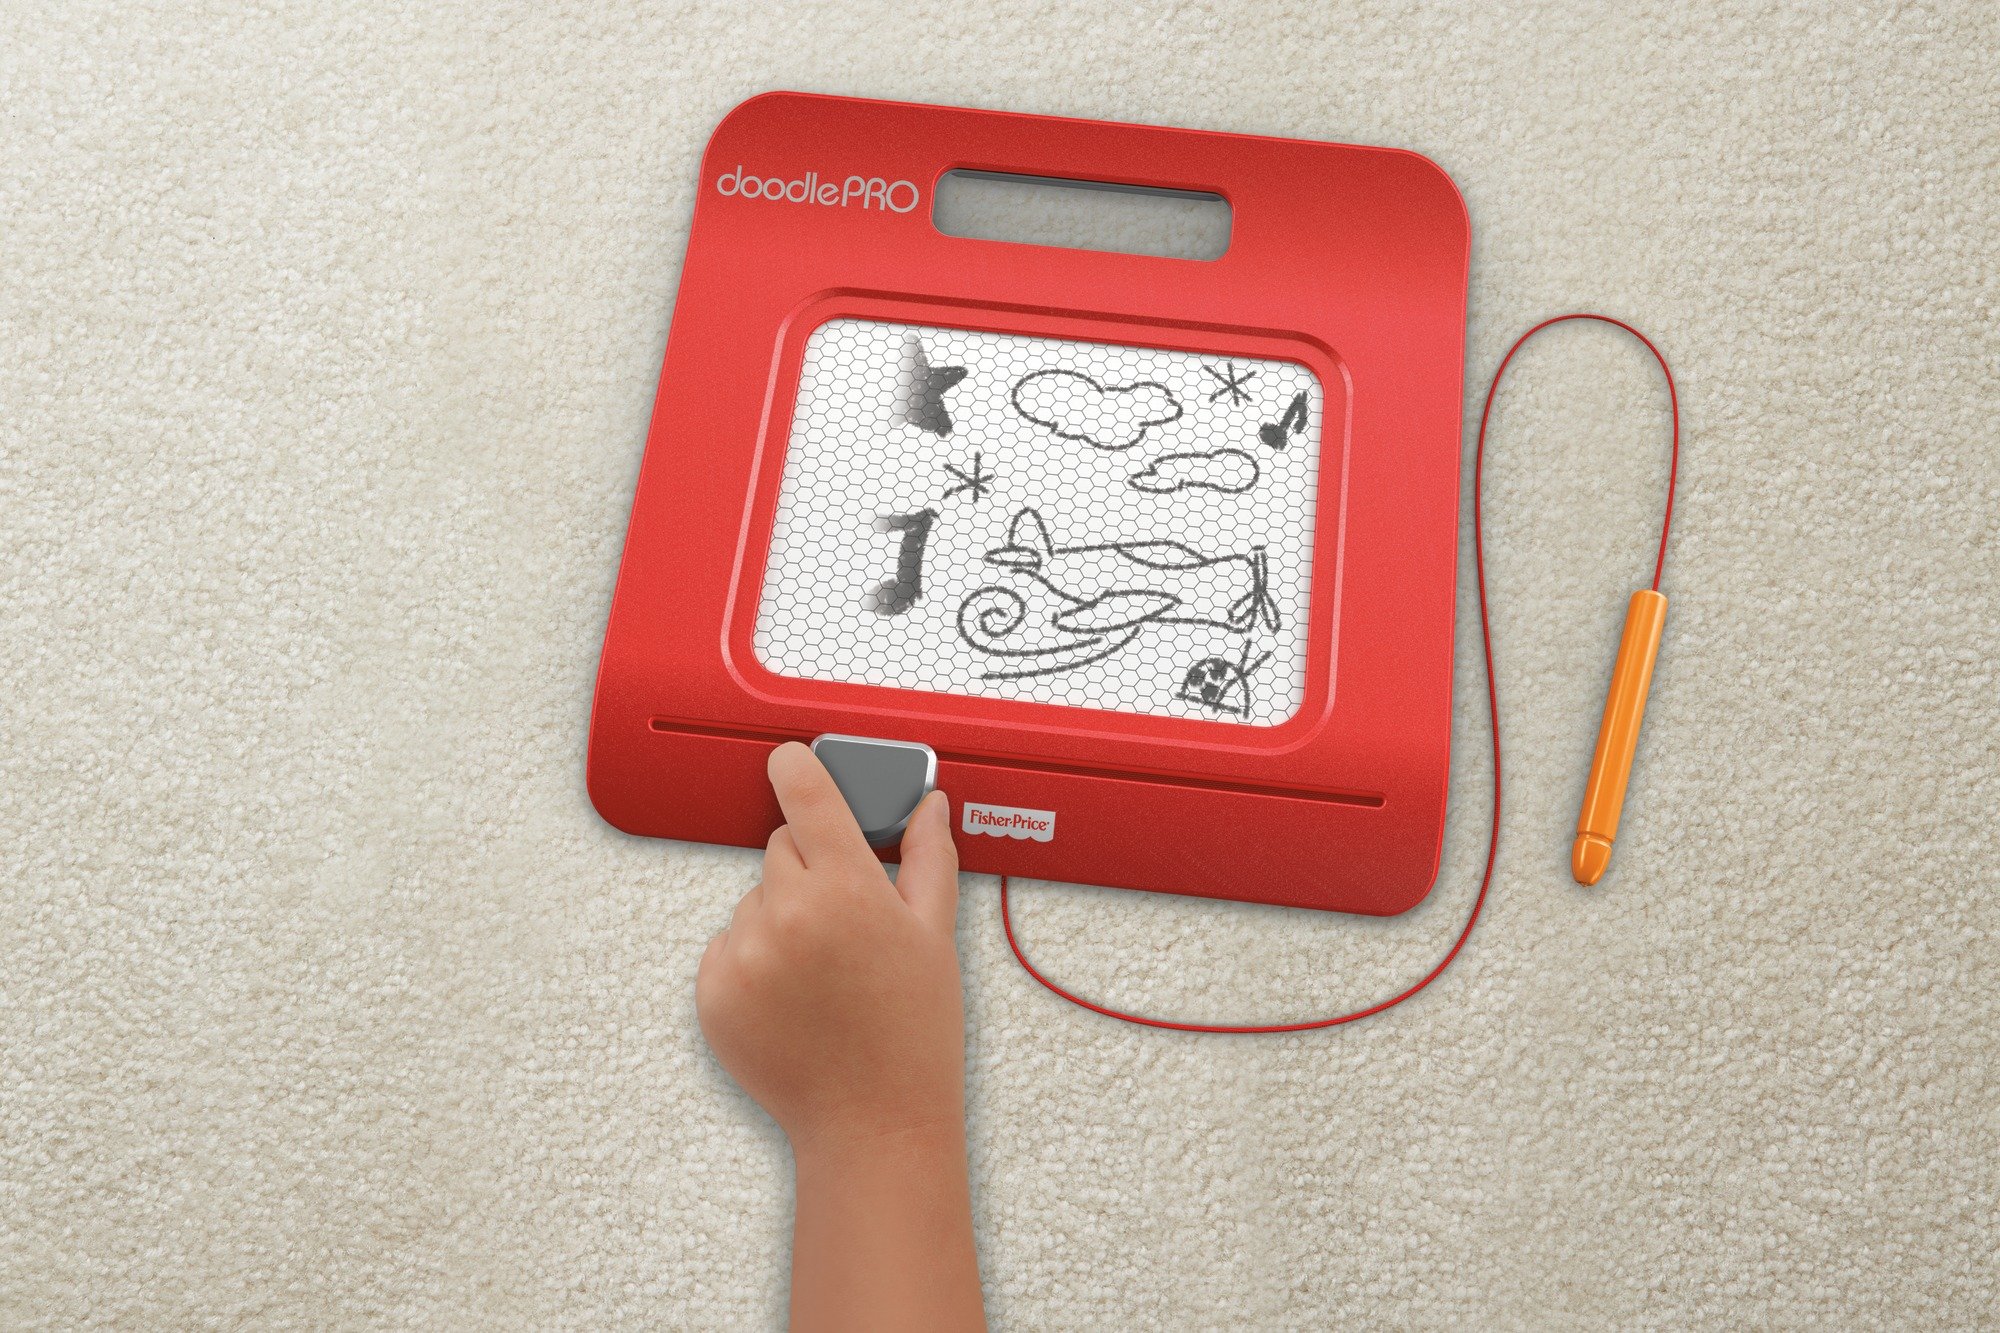 Fisher-Price DoodlePro, Trip, (Red)